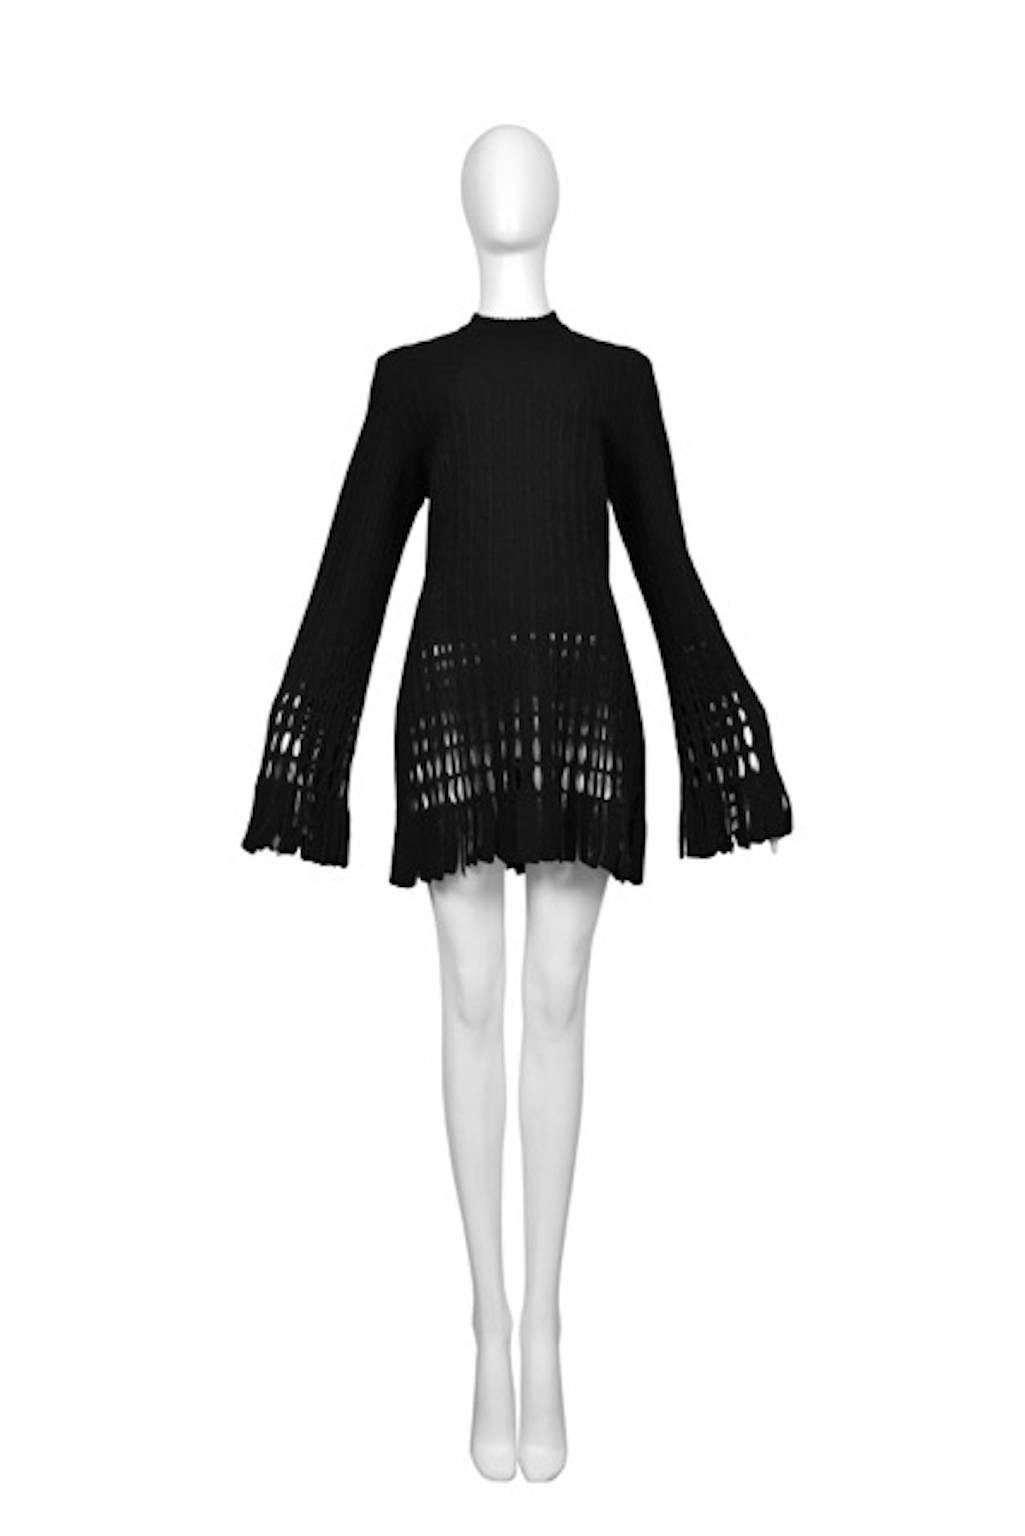 Vintage Azzedine Alaia black long sleeve mini knit dress featuring an open weave design at the cuffs and skirt.

Please contact us for additional photos.